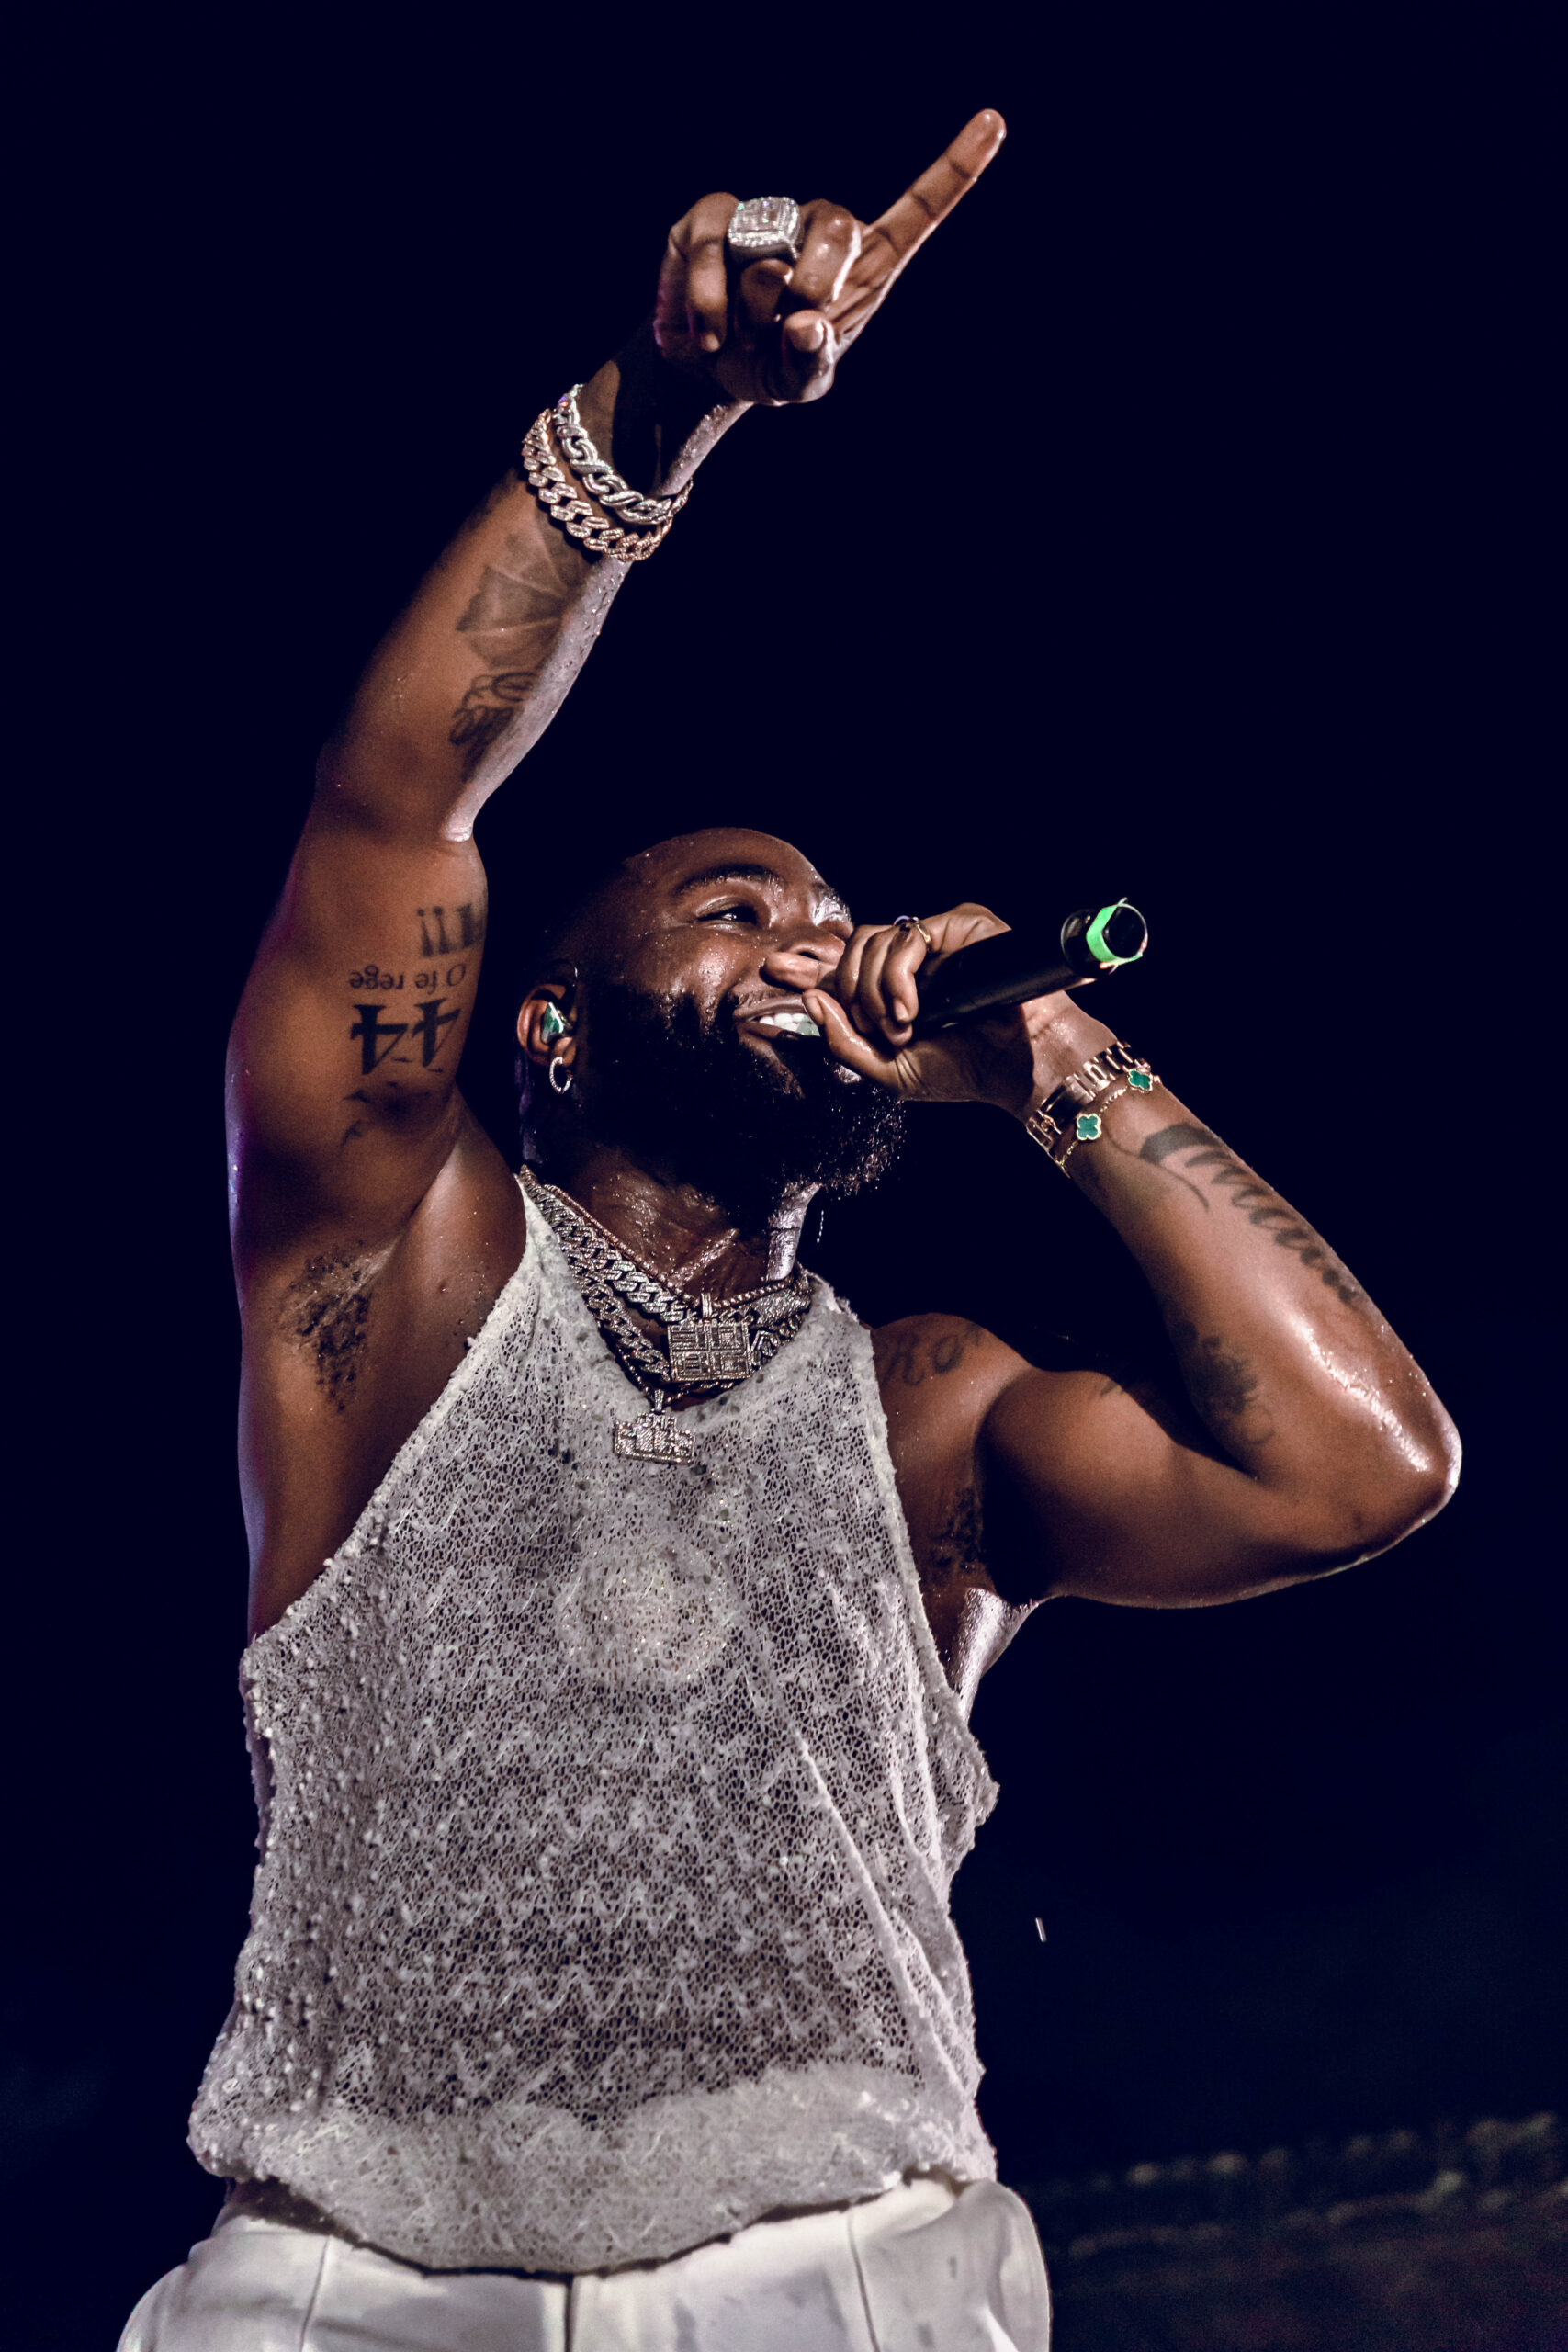 FIRST BANK’S SPONSORSHIP OF DAVIDO’S TIMELESS CONCERT REINFORCES ITS IMPACT ON THE ART AND ENTERTAINMENT INDUSTRY